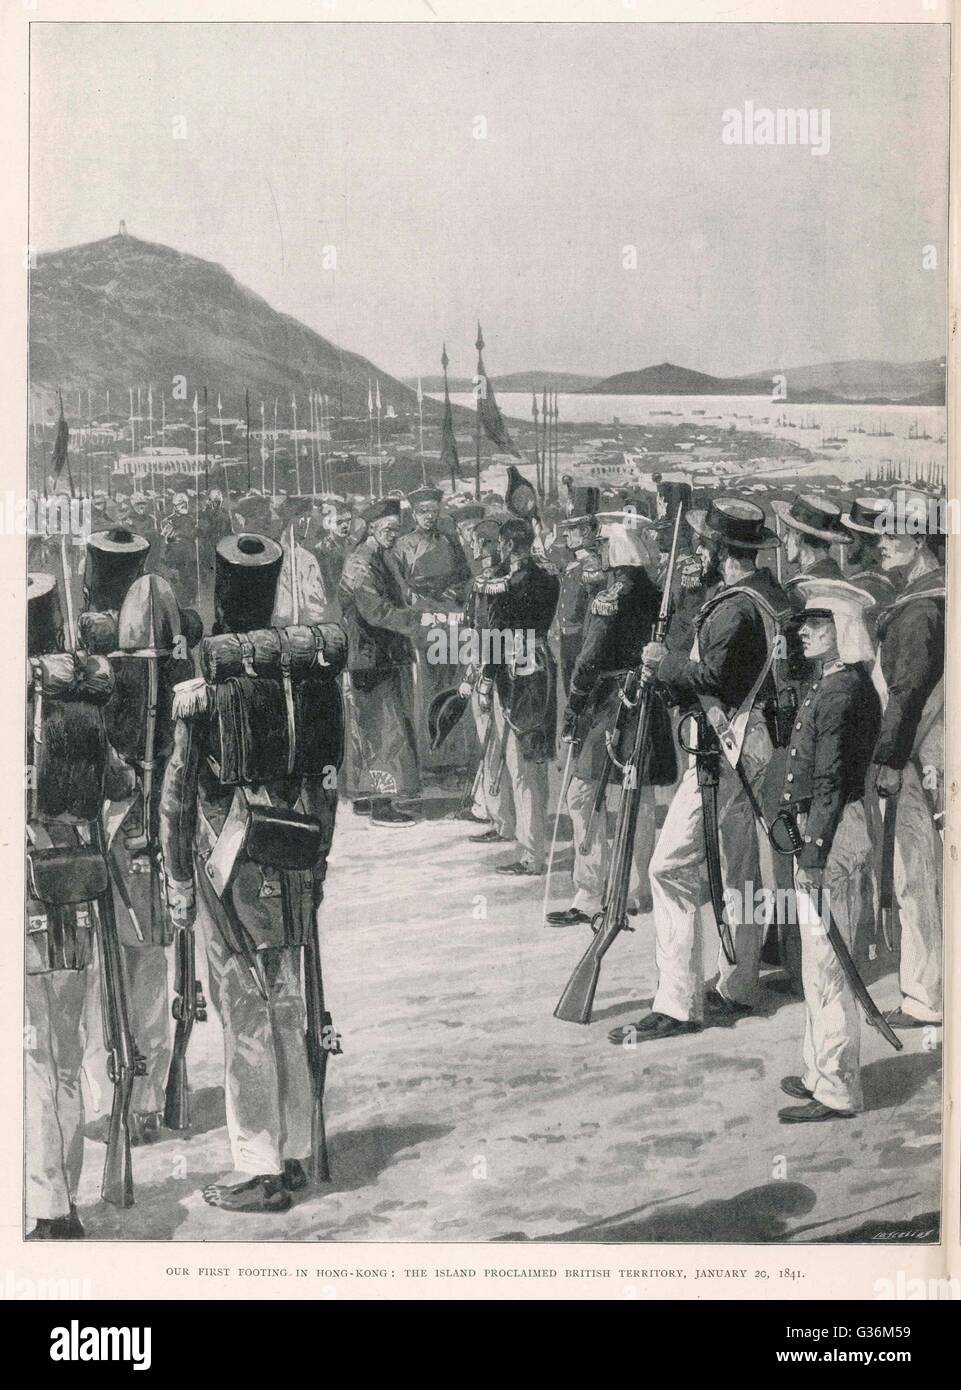 The British take over the  sland, occupied by them since  1839 but now formally ceded by  the Chinese and confirmed by  the Treaty of Nanking 1842      Date: 20 January 1841 Stock Photo